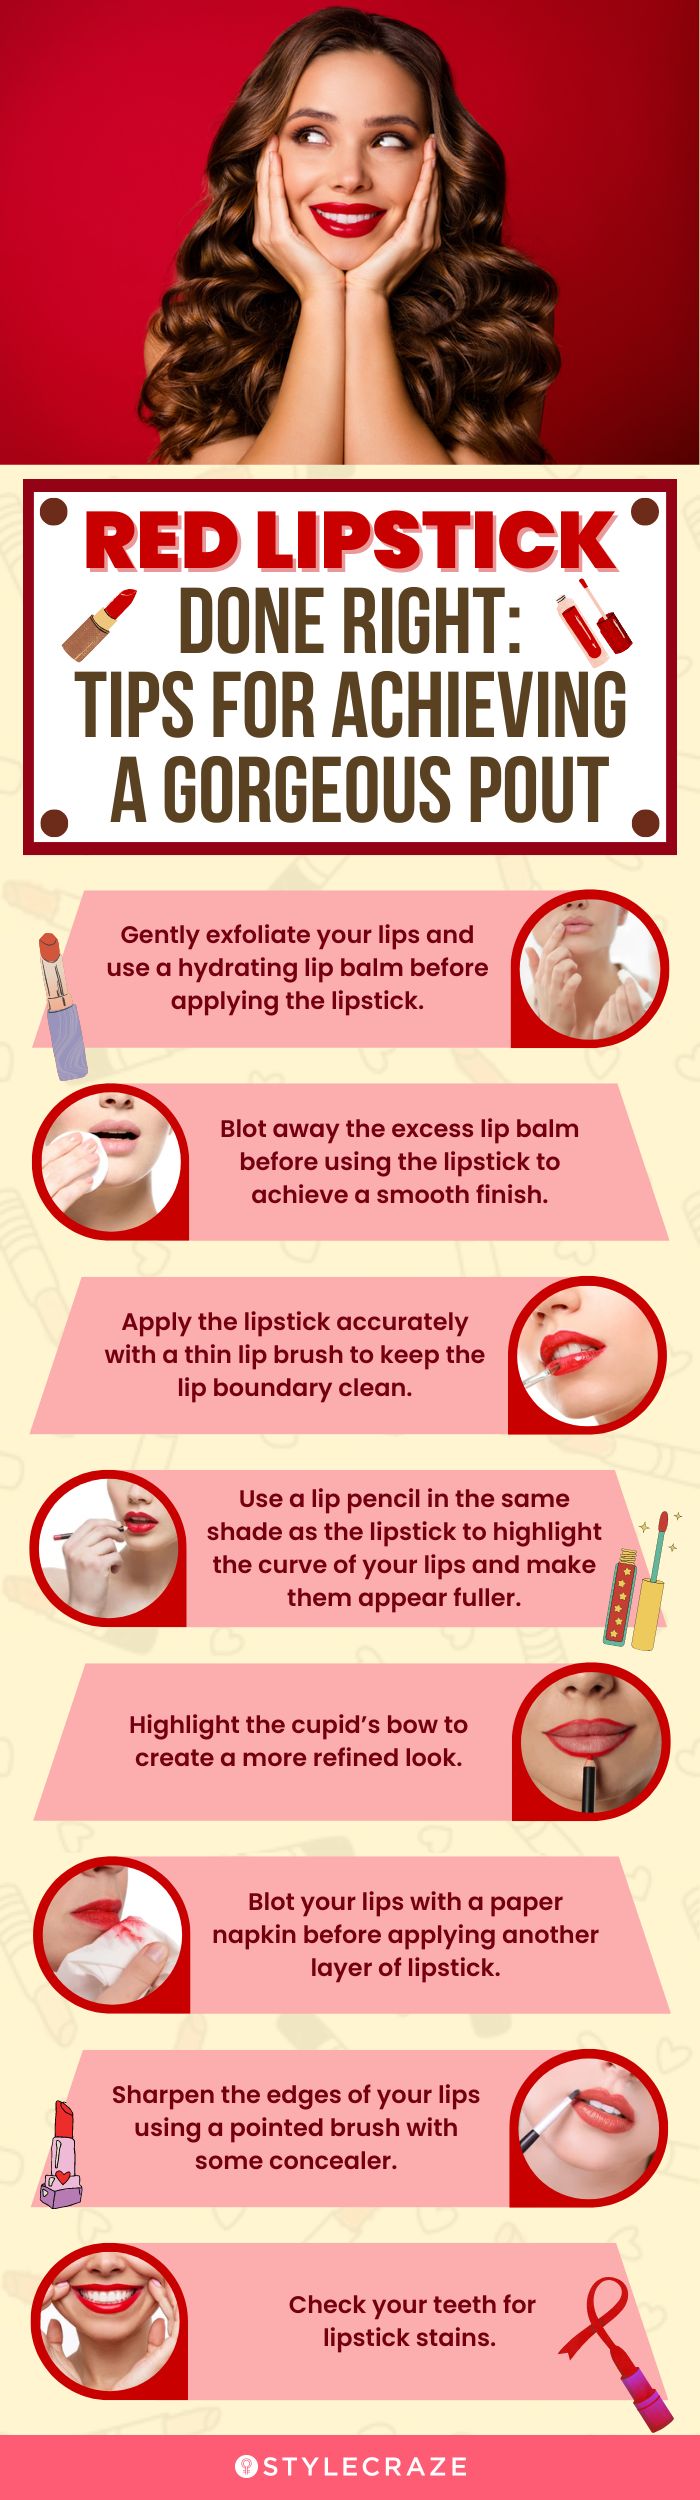 red lipstick done right tips for achieving a gorgeous pout (infographic)